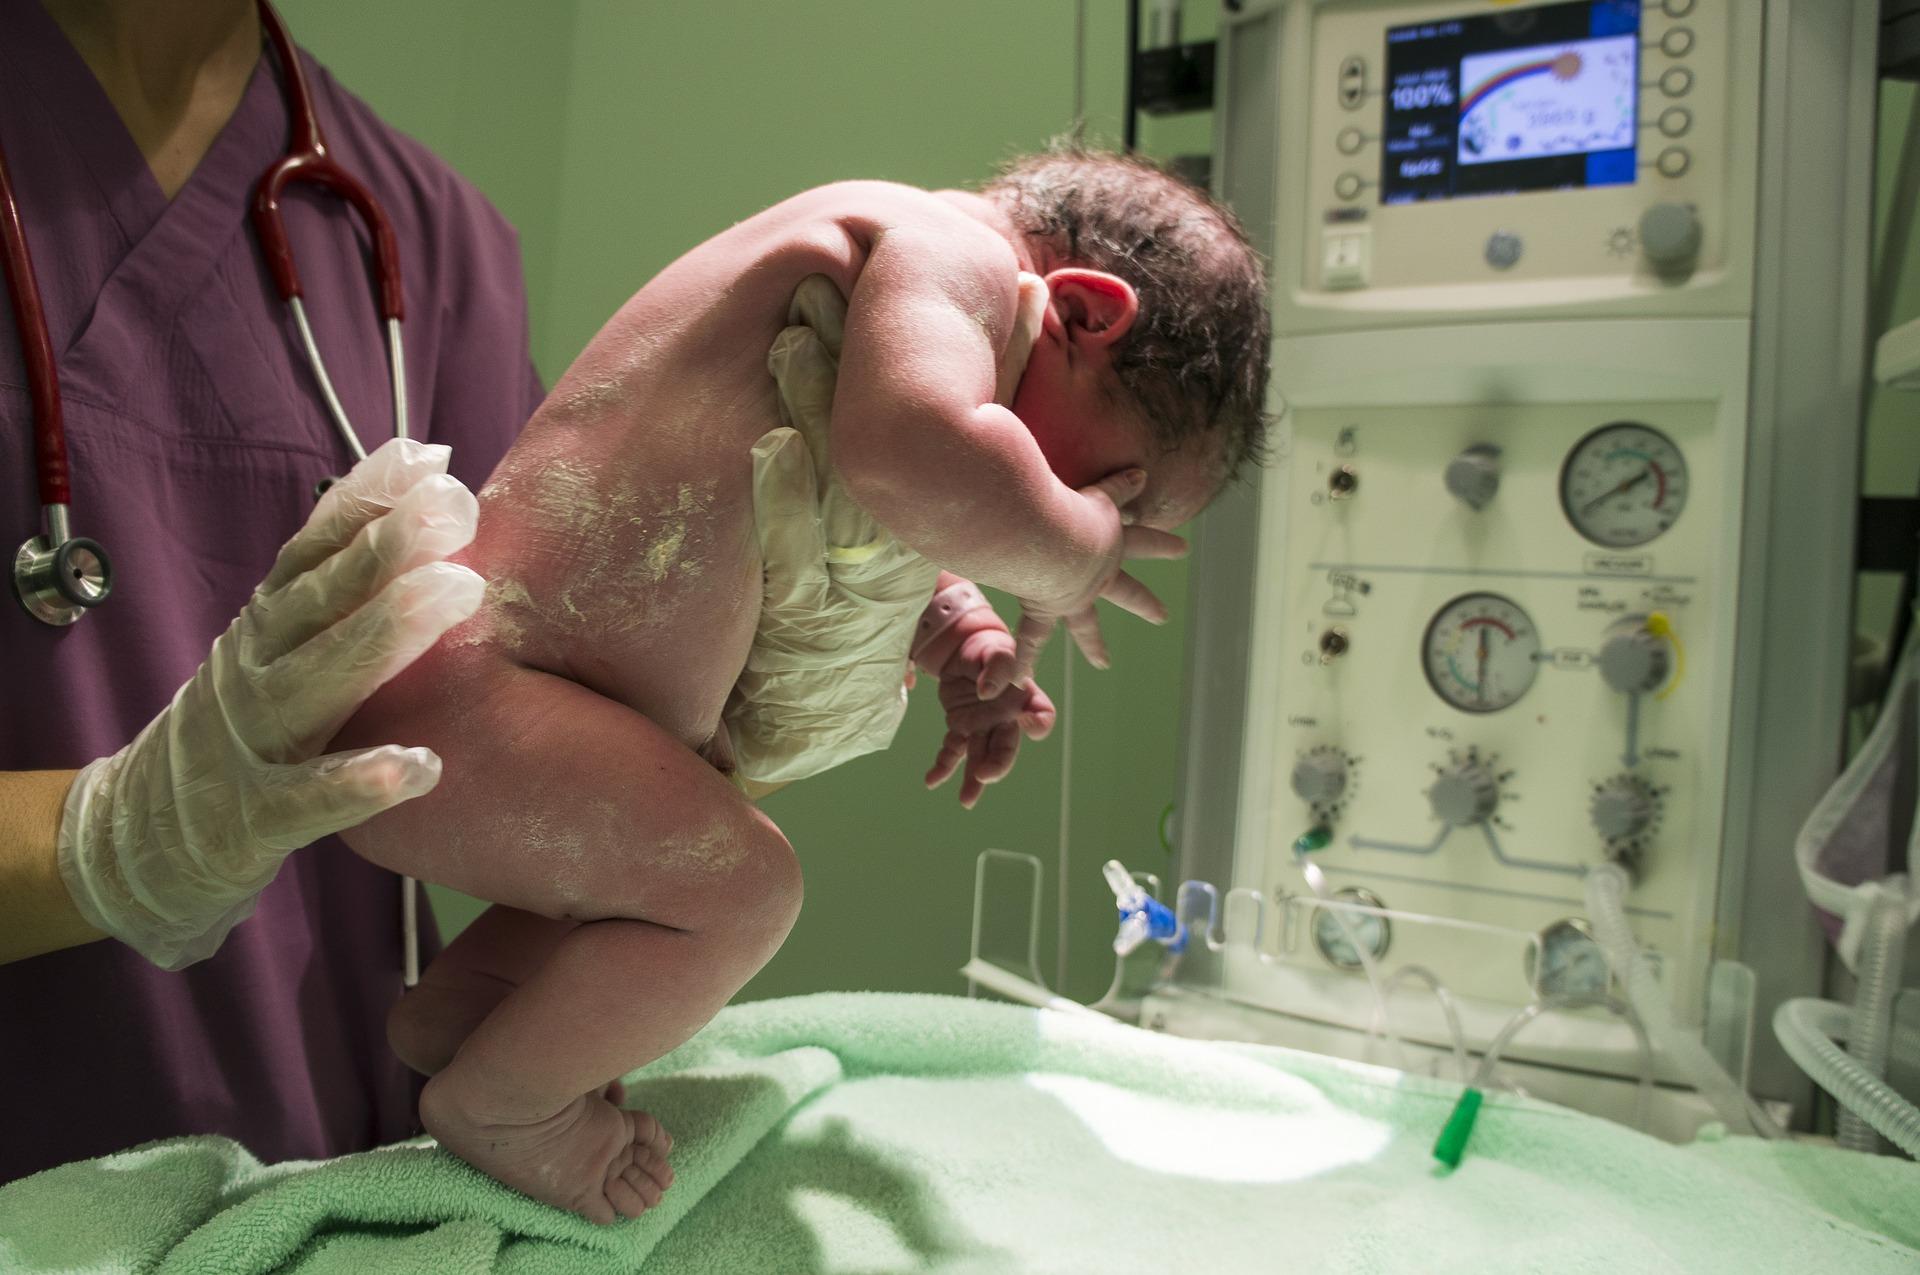 Baby born with strange 5-inch human ‘tail’ with ball at the end